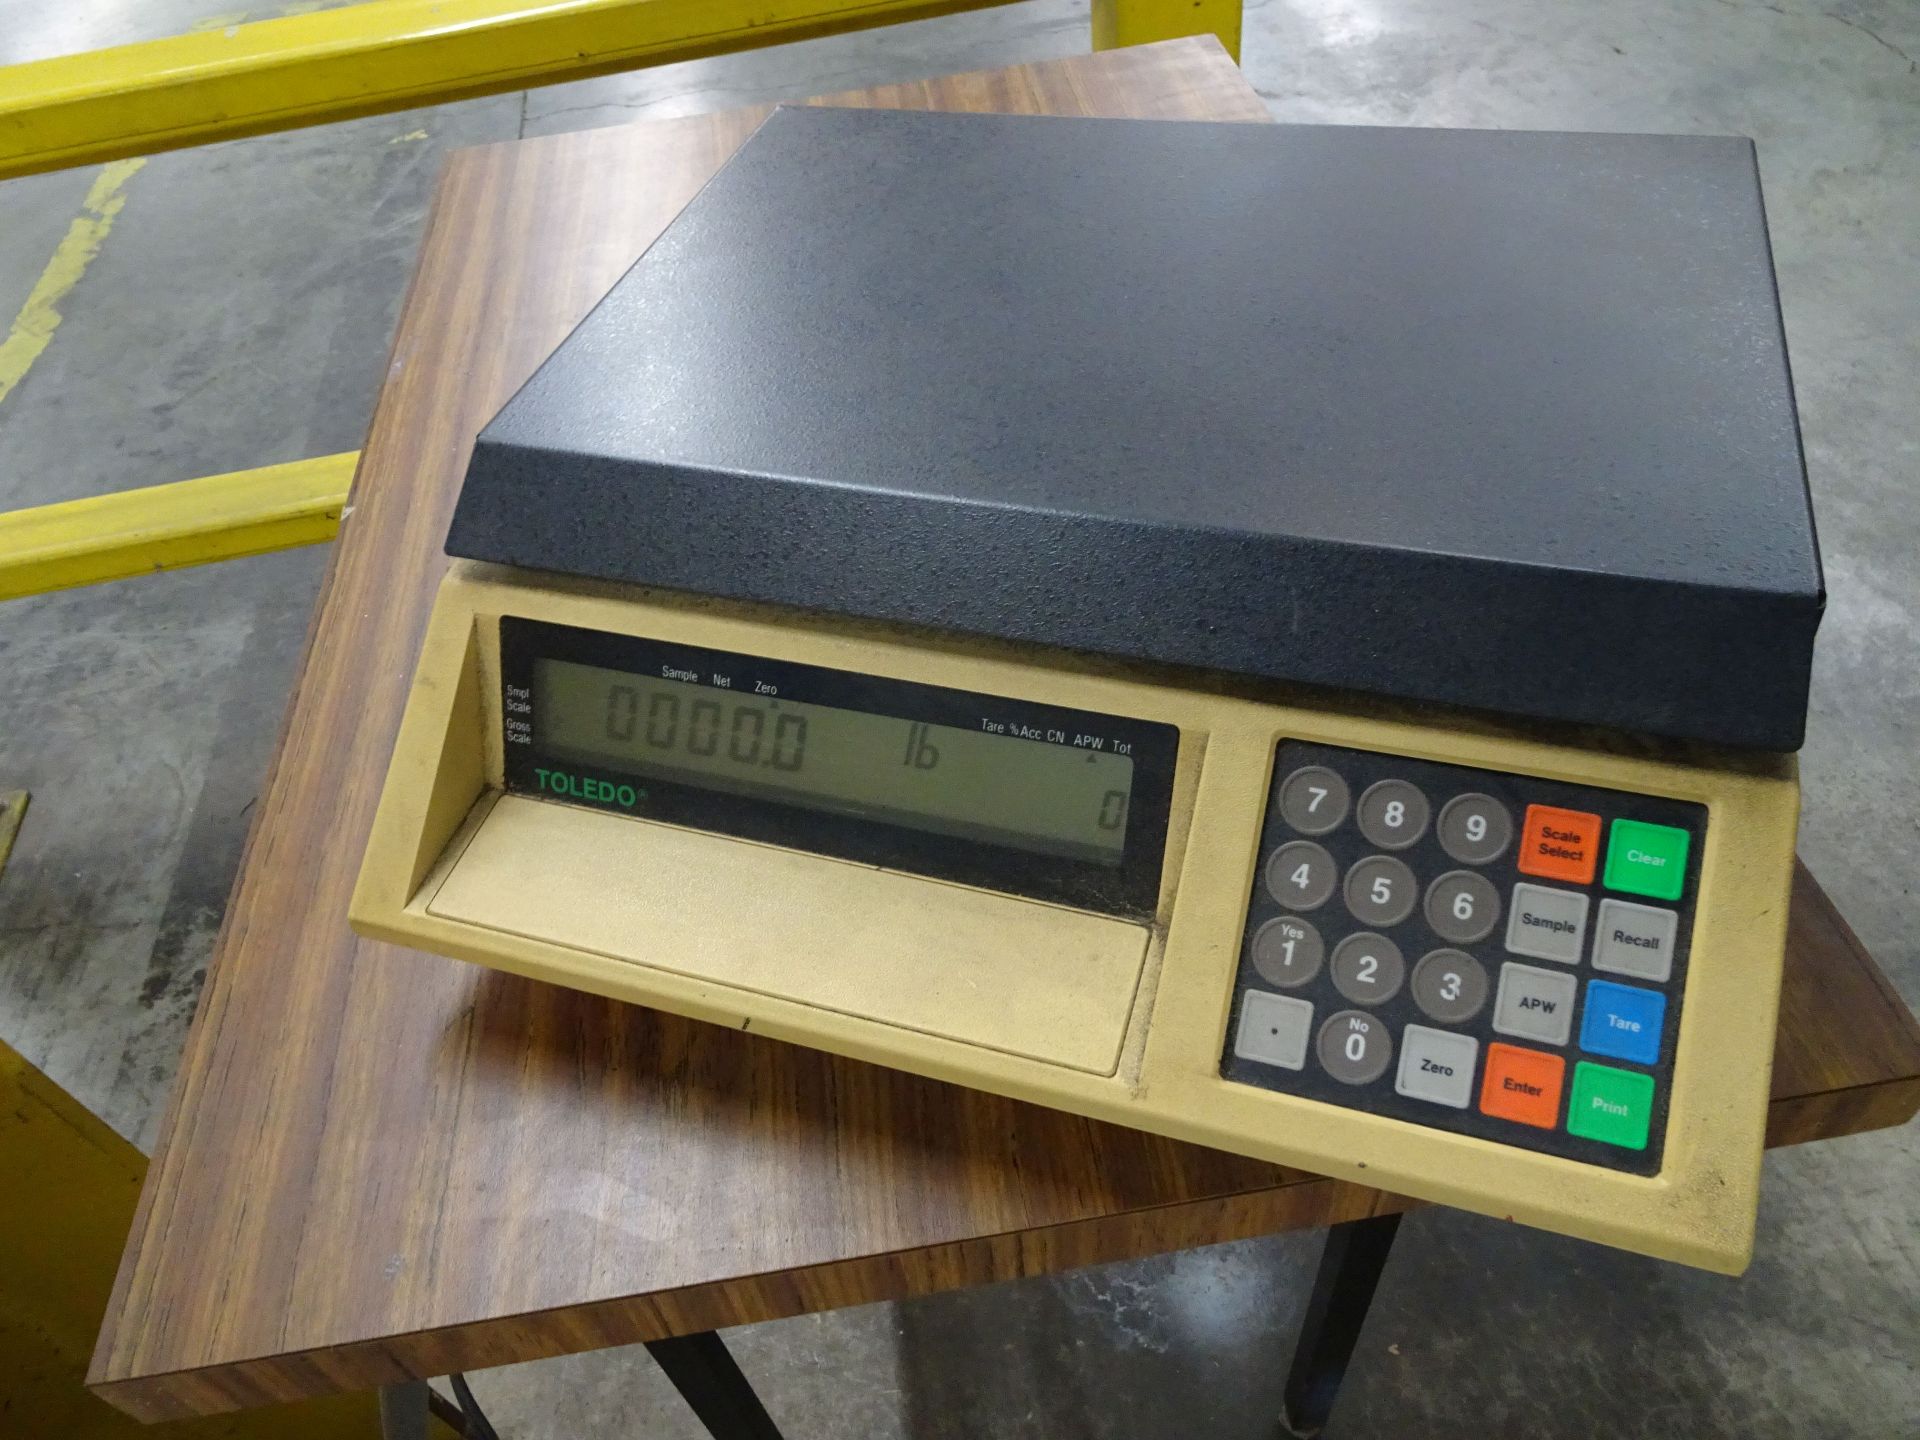 5,000 LB. (APPROX.) WEIGH PLATE FLOOR TYPE PLATFORM SCALE WITH TOLEDO ELECTRONIC READ OUT AND - Image 2 of 4